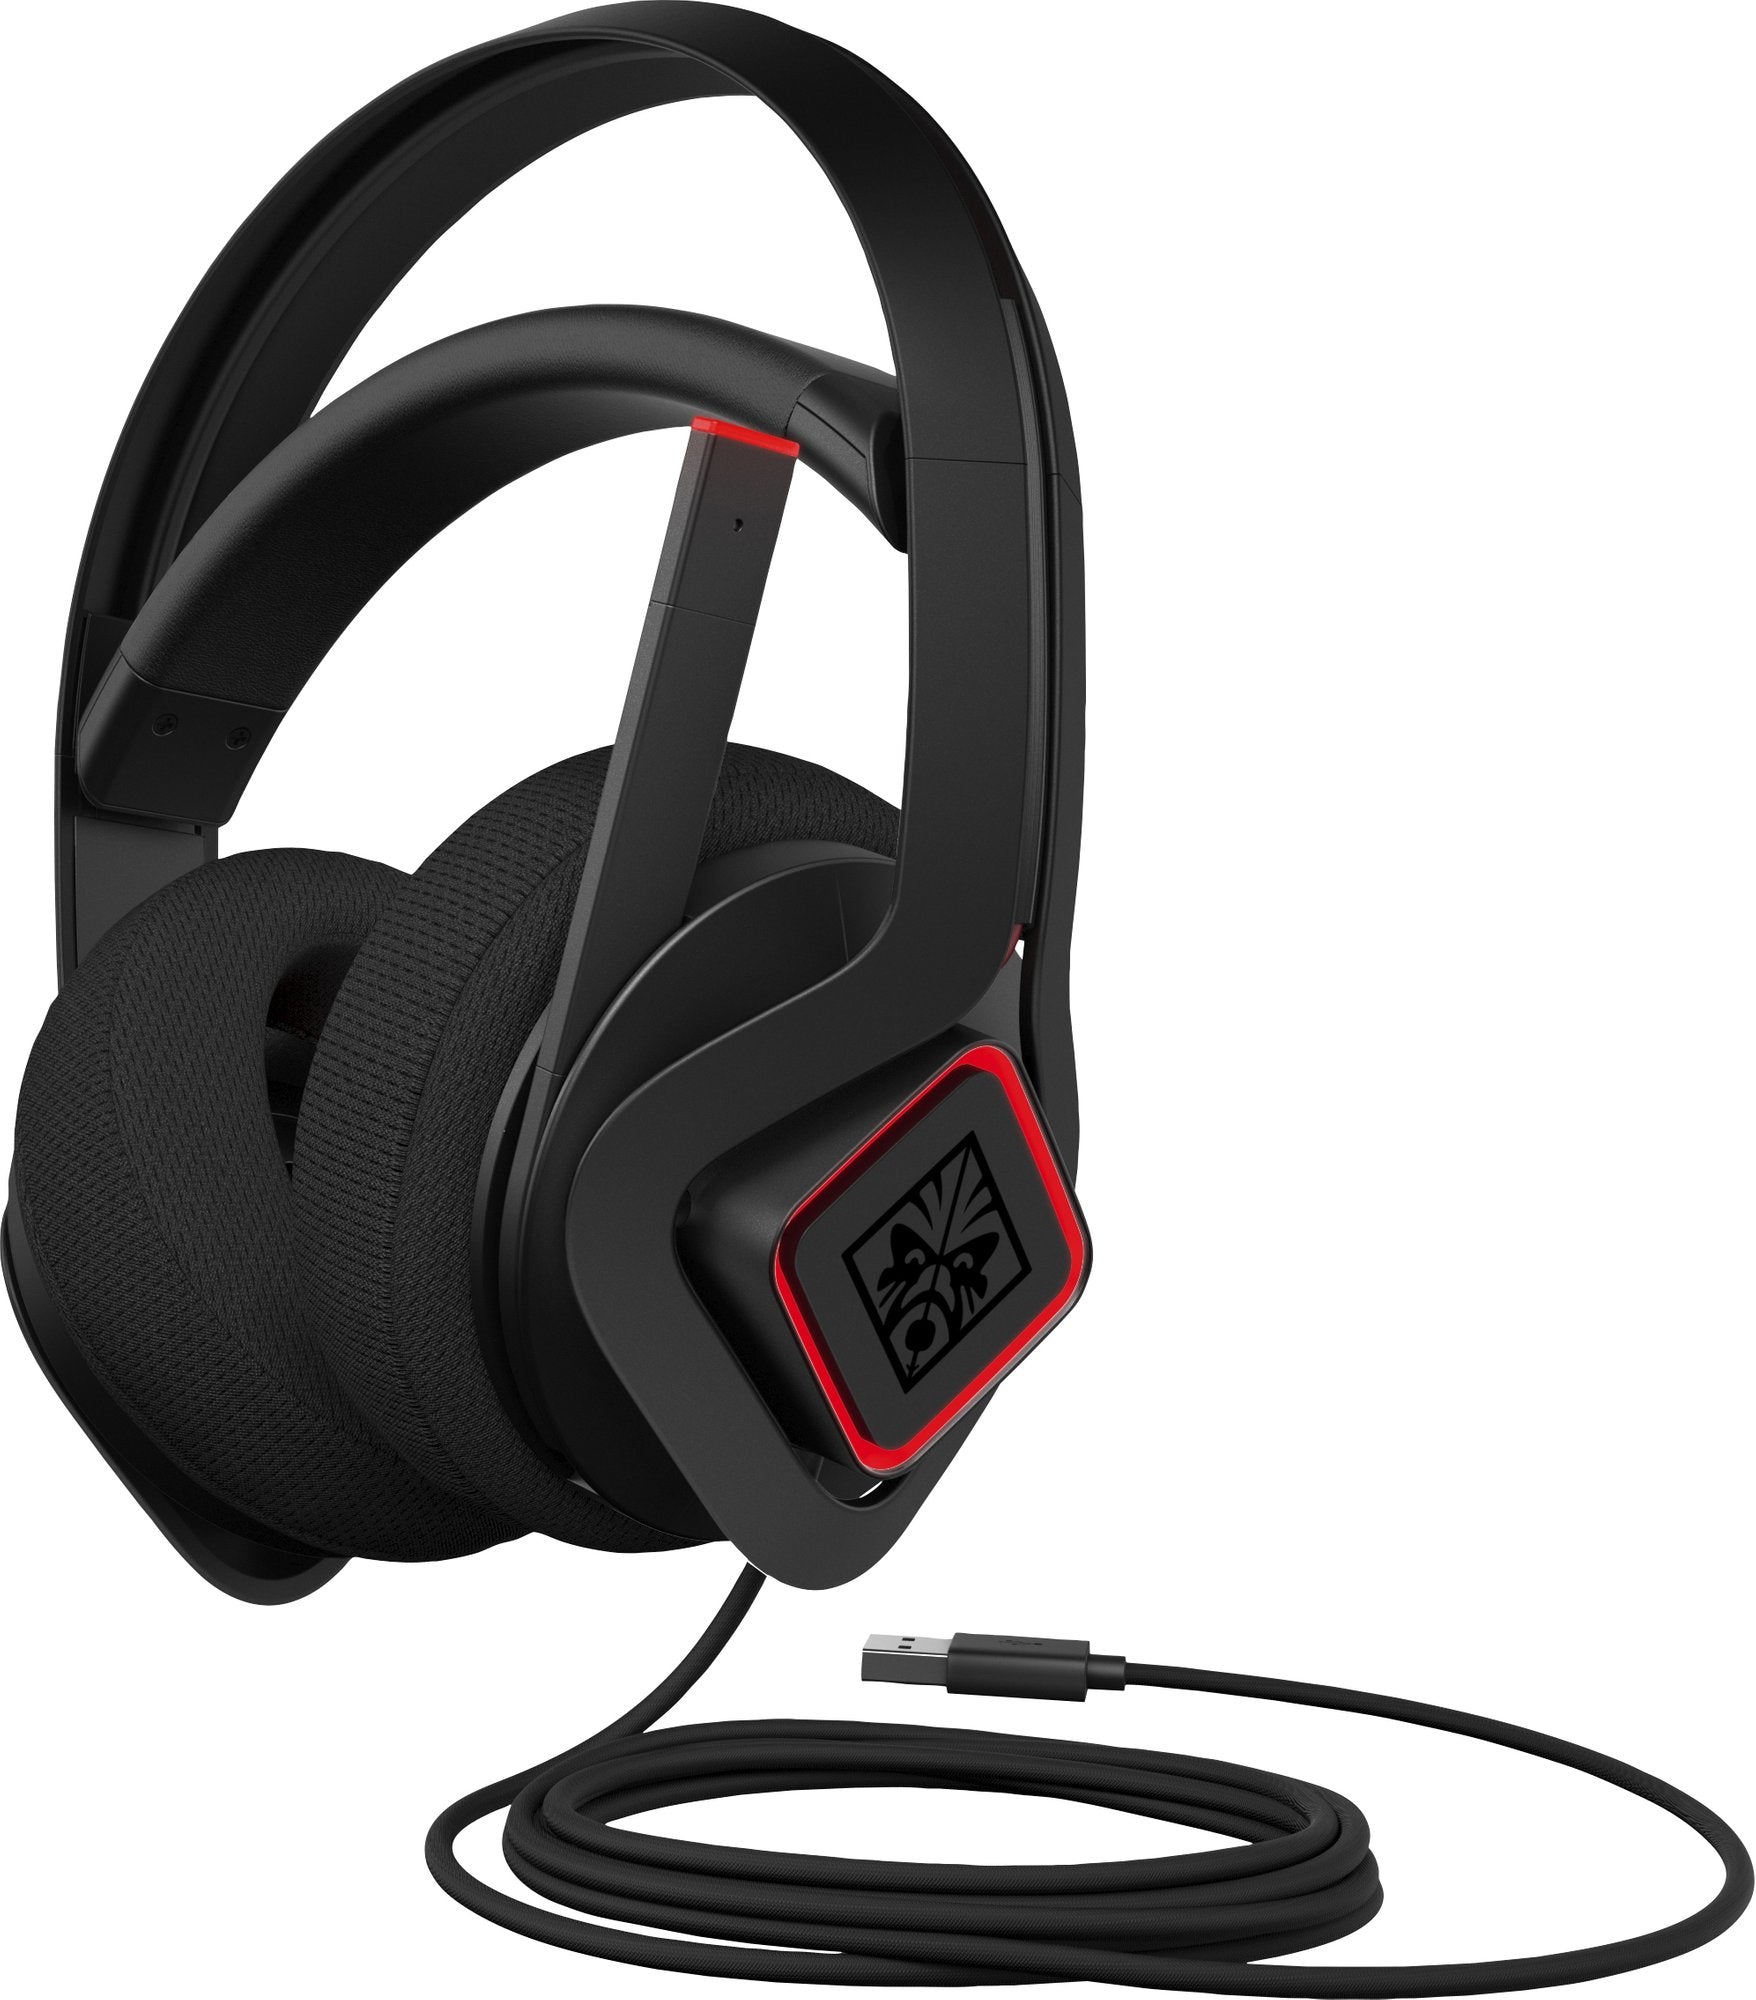 (B1) HP OMEN Mindframe Prime Gaming Headset (Virtual Surround Sound, Noise-Cancelling)